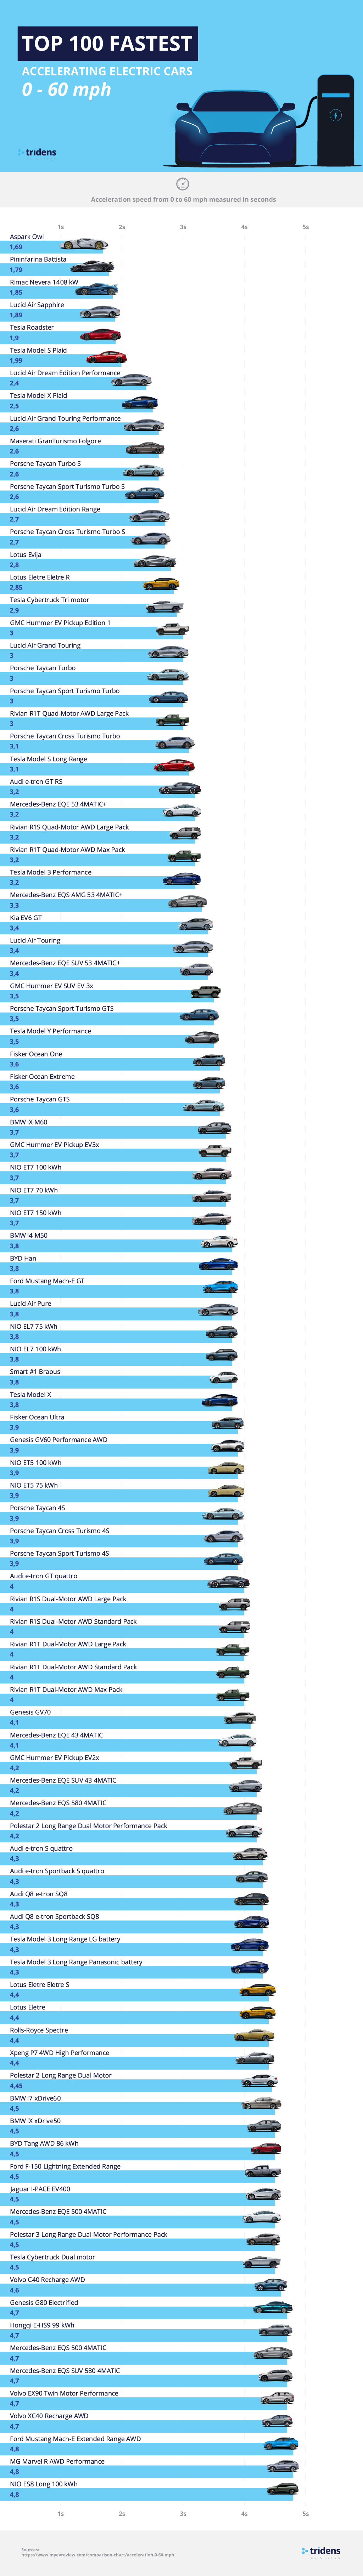 Top 100 Fastest Accelerating Electric Cars 0 - 60 mph